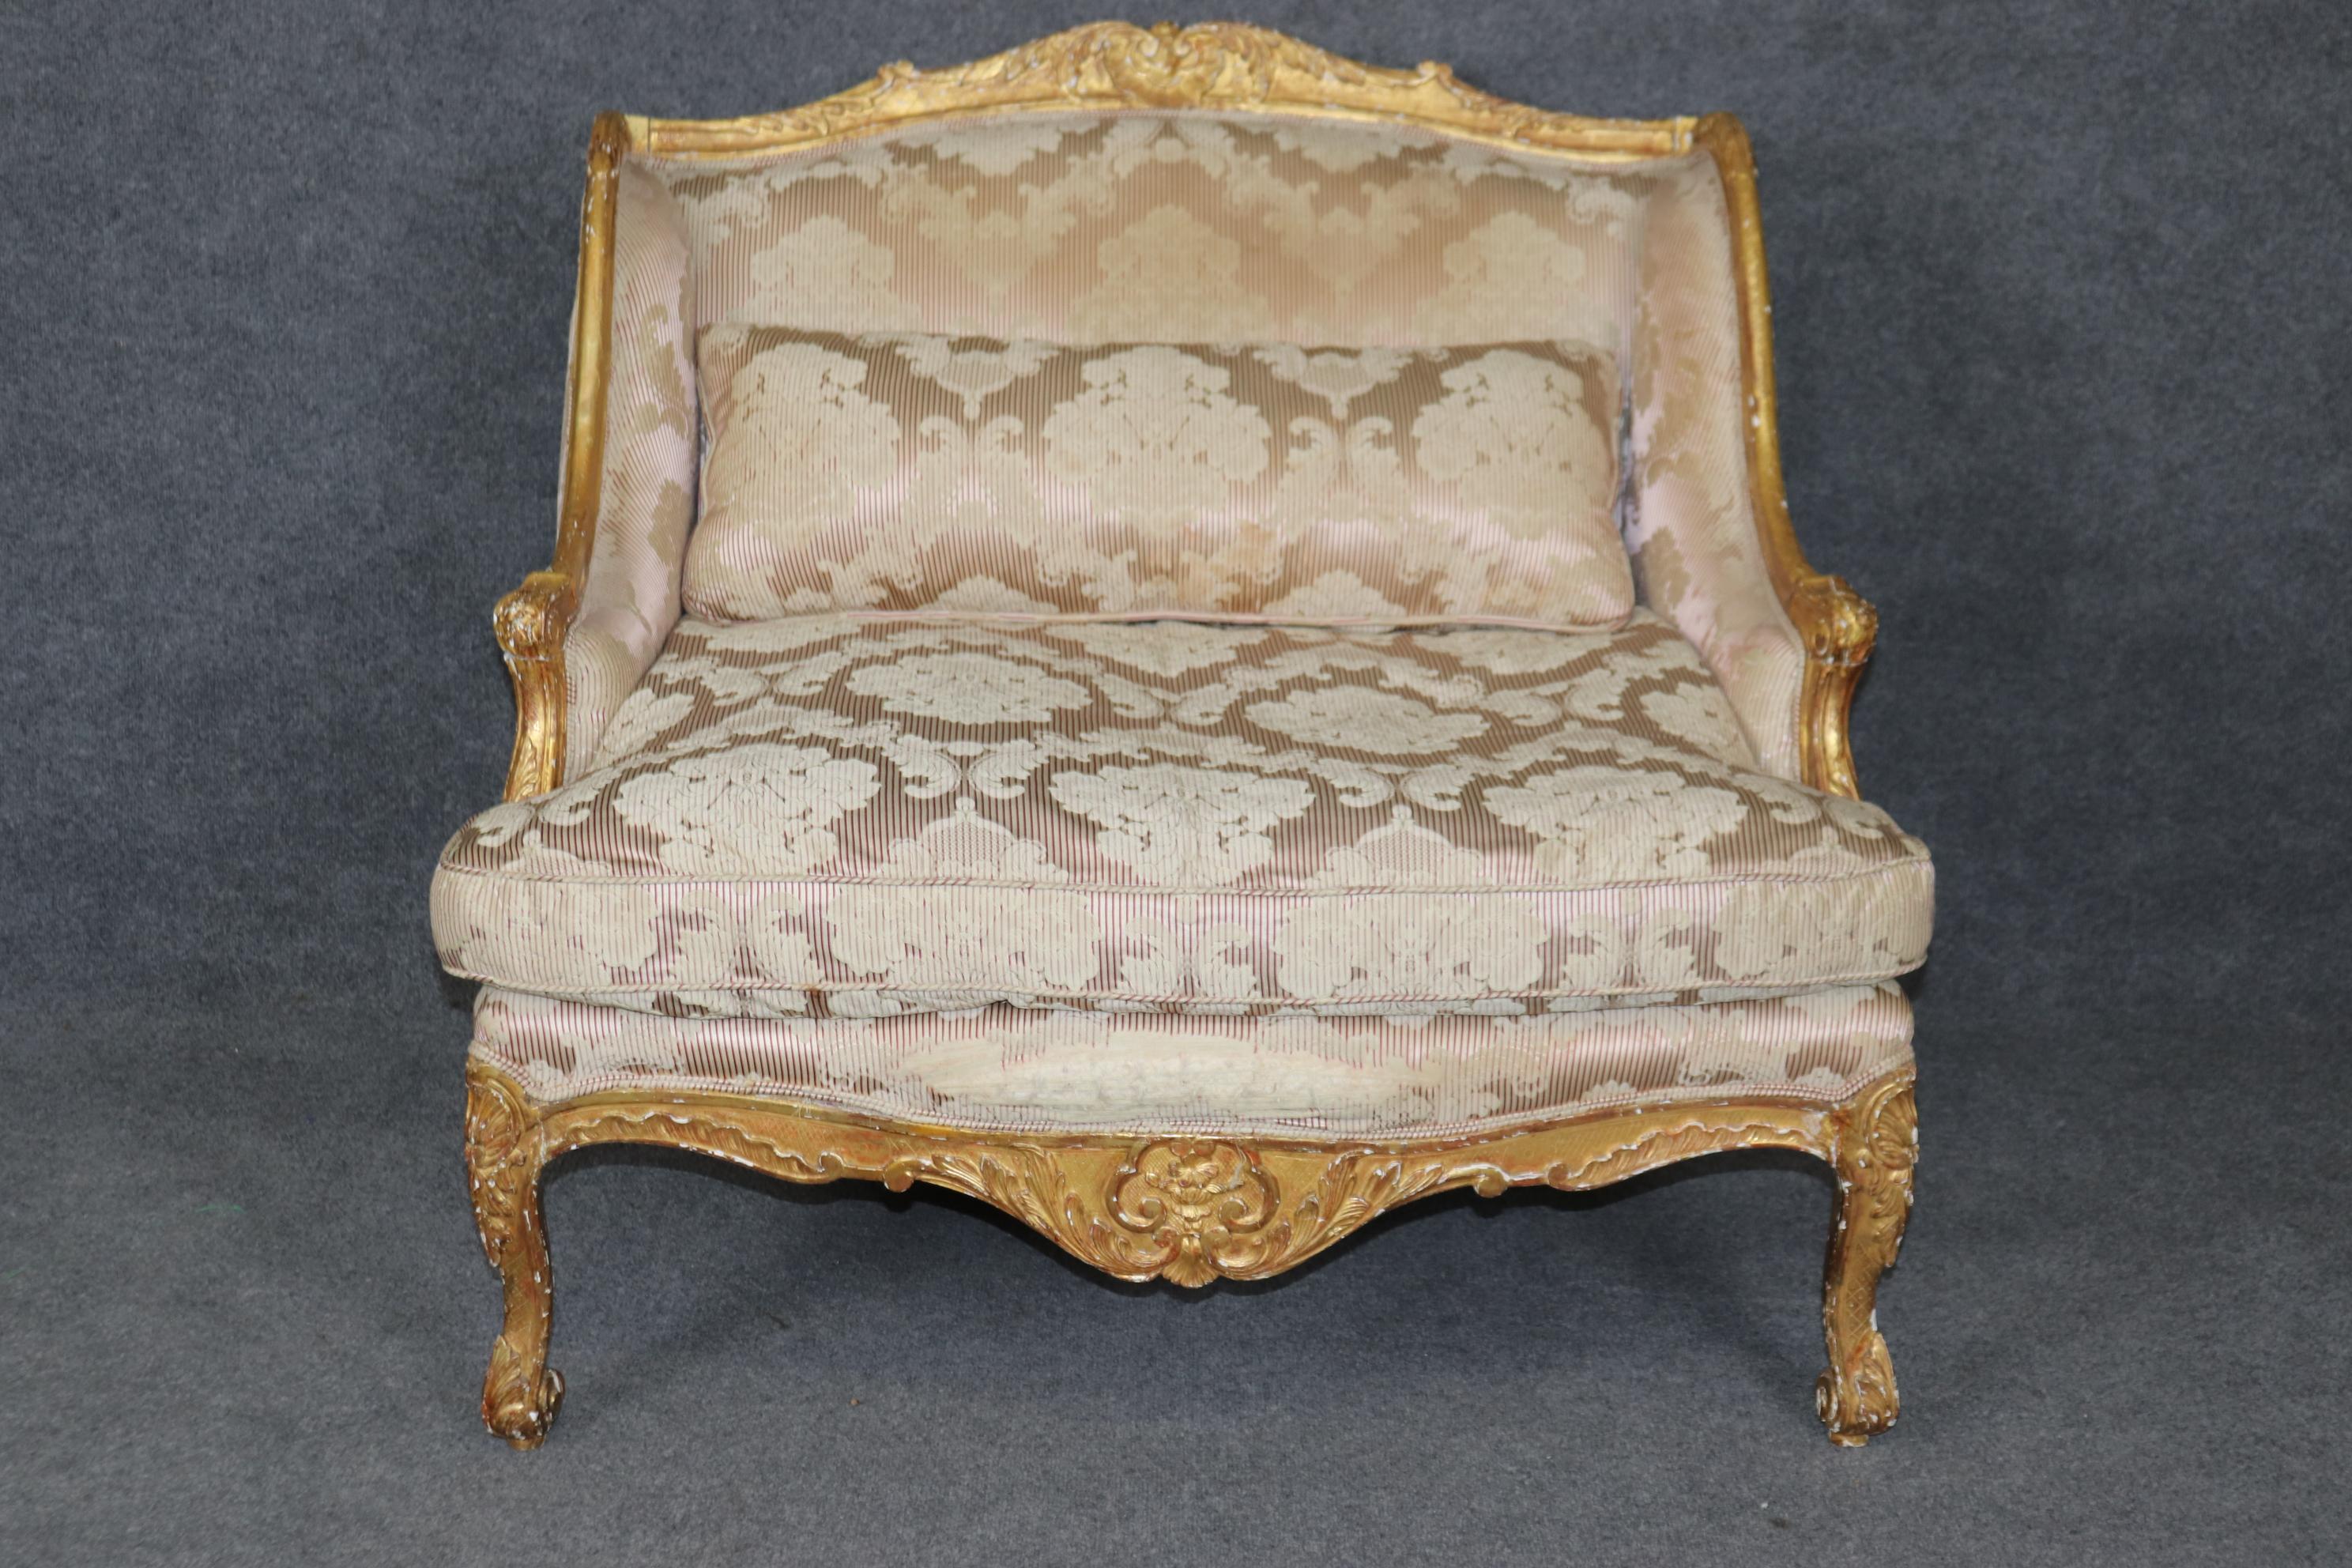 Superb 19th century French Gilded Louis XV Style Marquis Bergere Chair  In Good Condition For Sale In Swedesboro, NJ